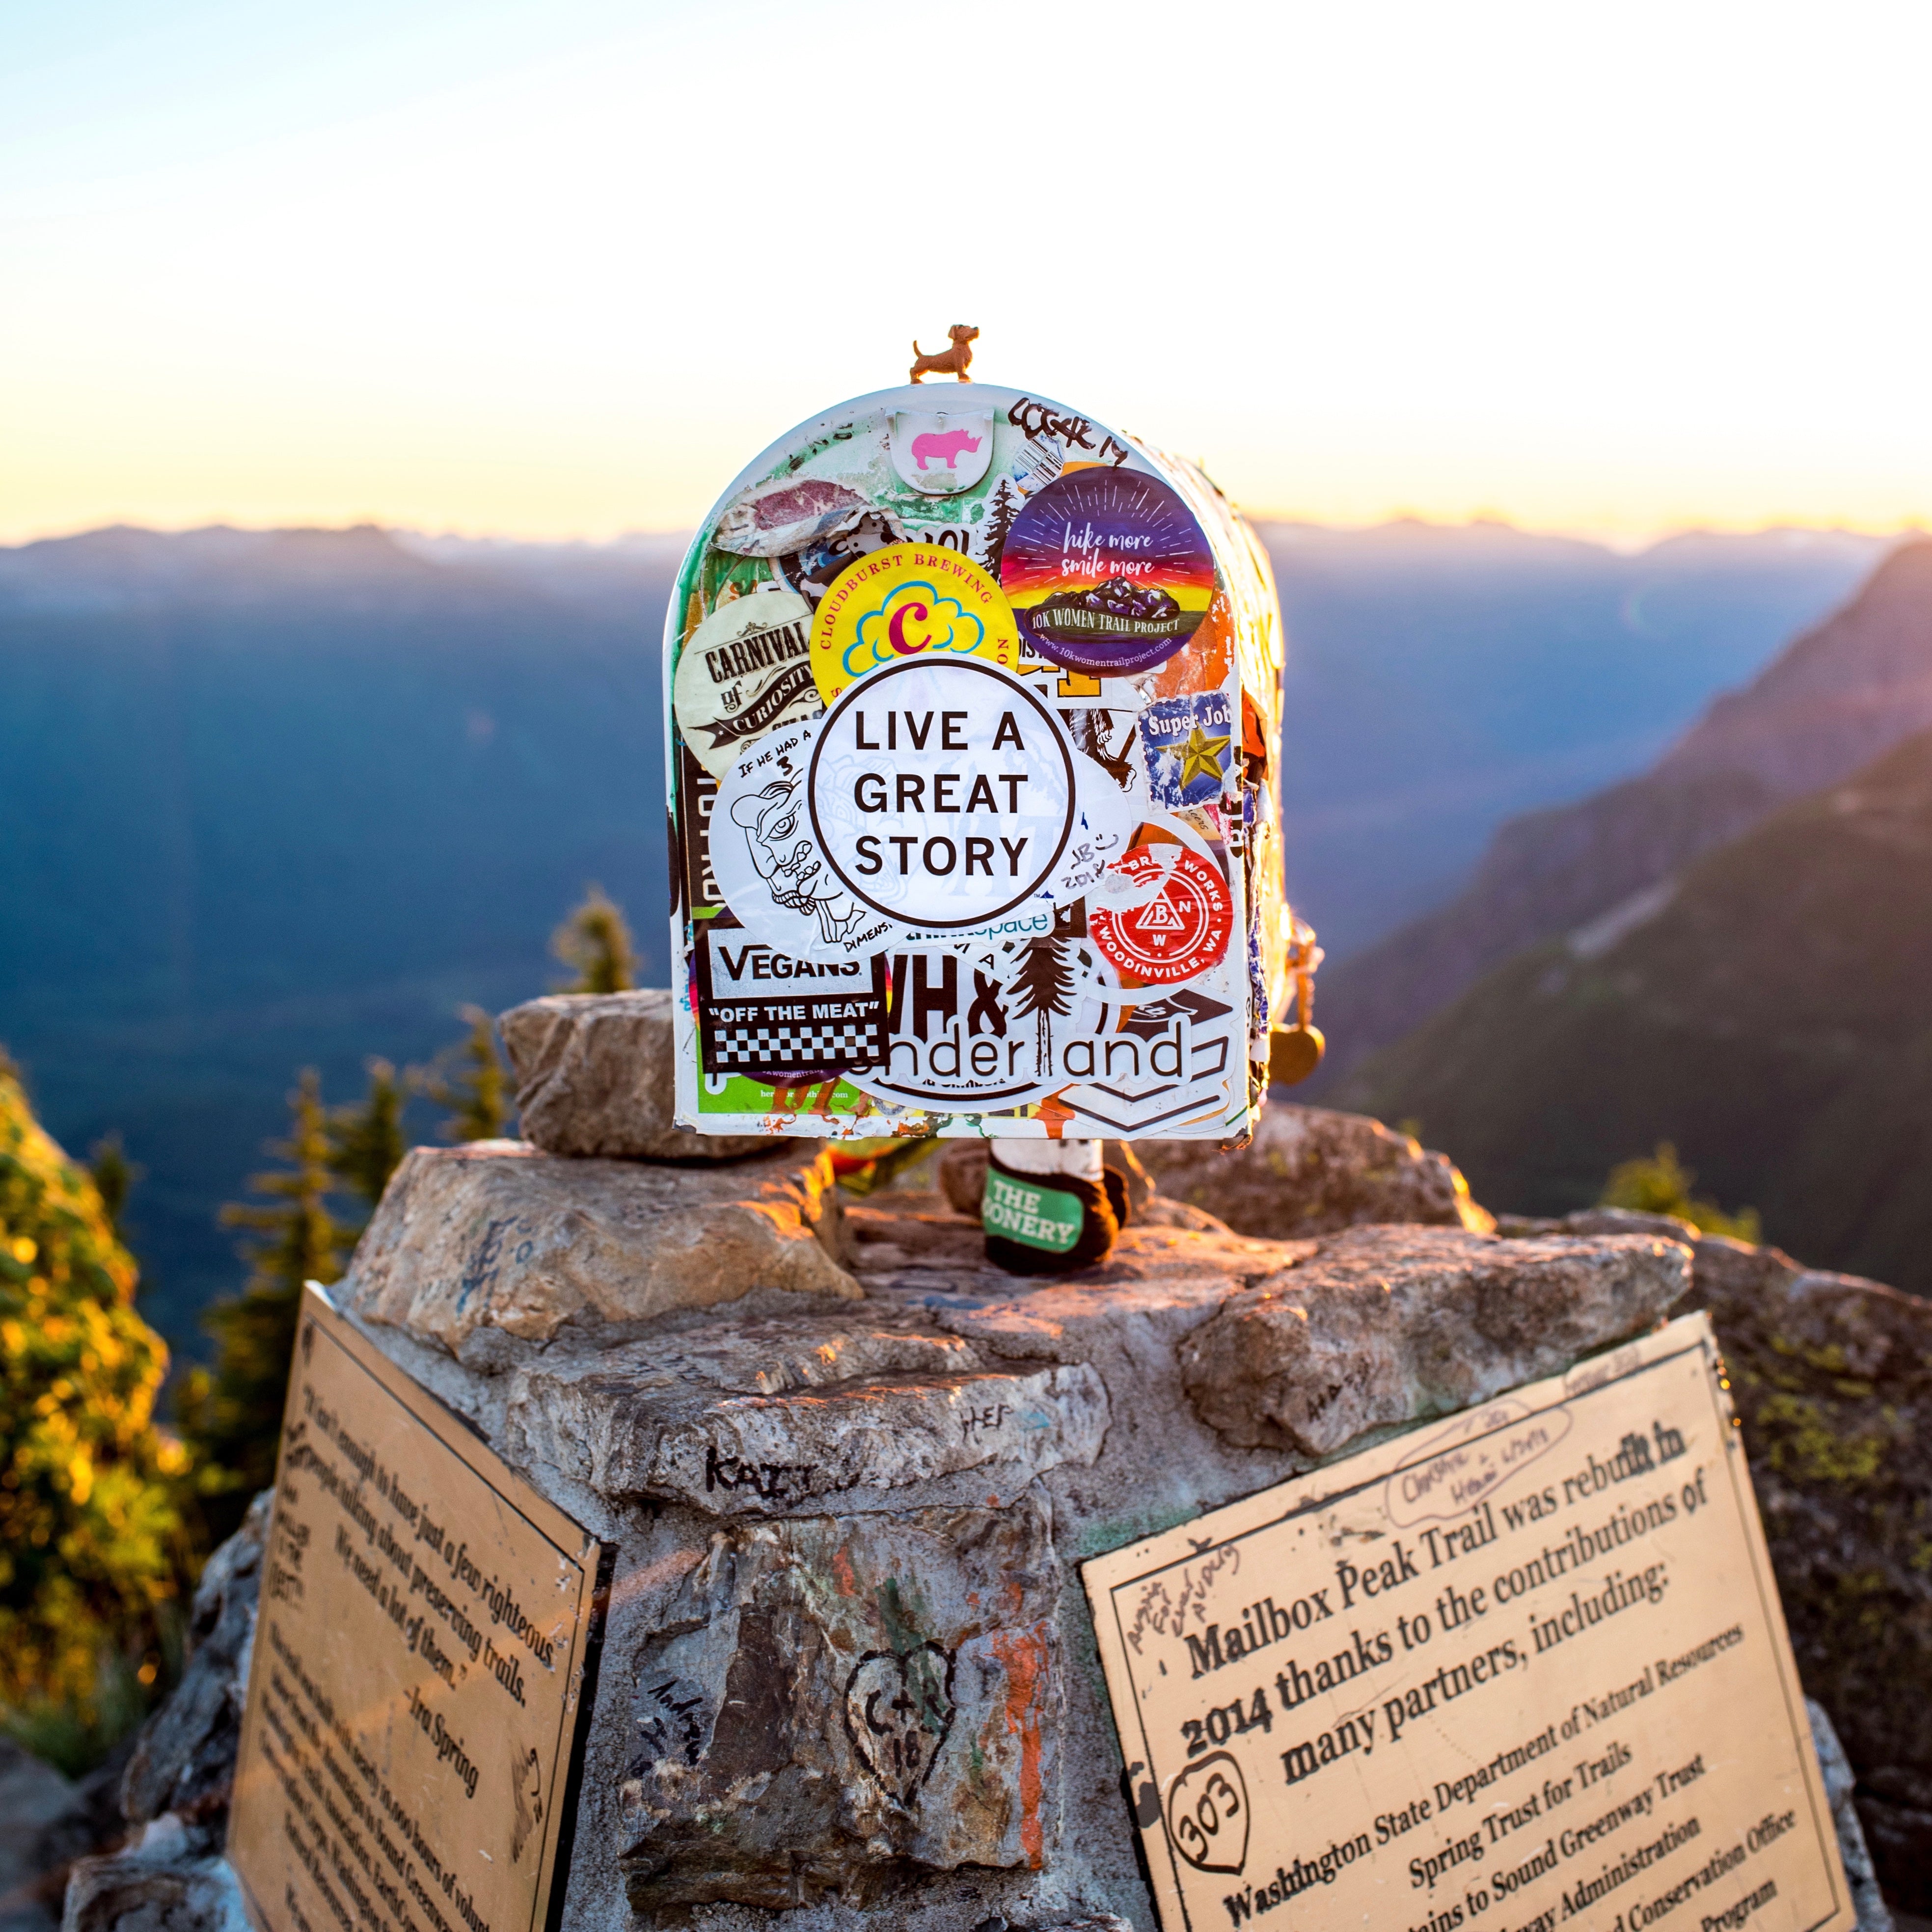 A LIVE A GREAT STORY sticker at a lookout point